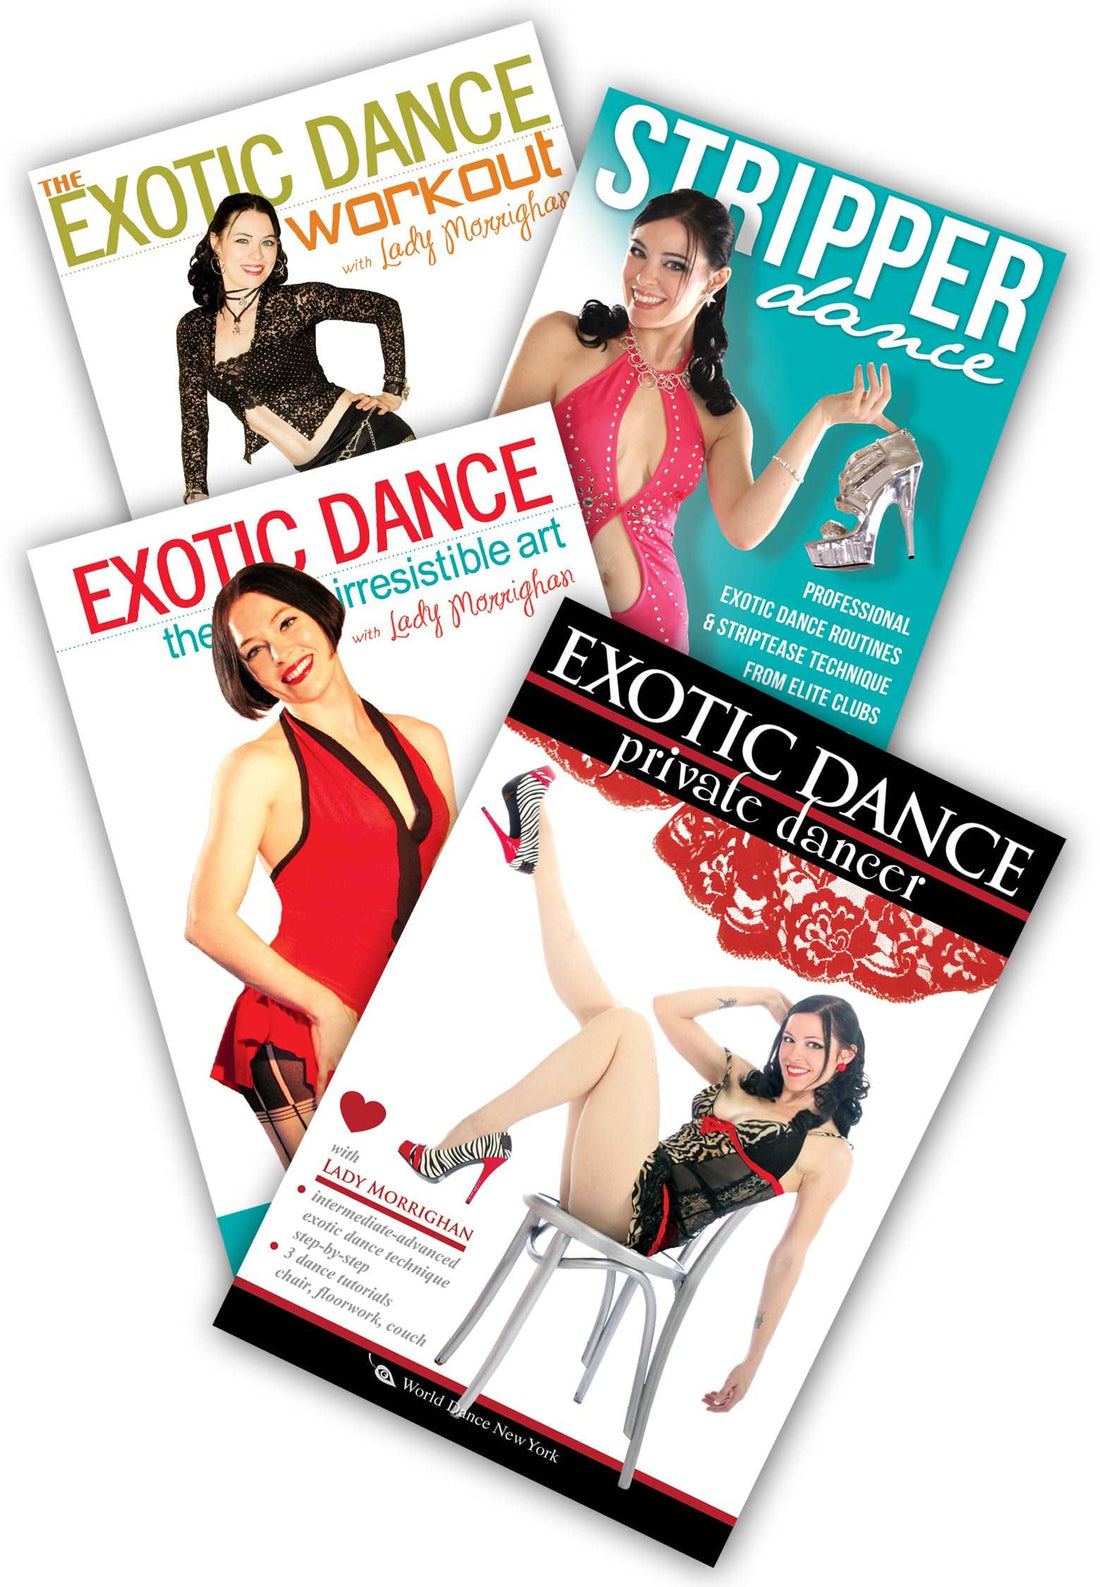 Exotic Dance Instruction - 4-DVD collection - World Dance New York